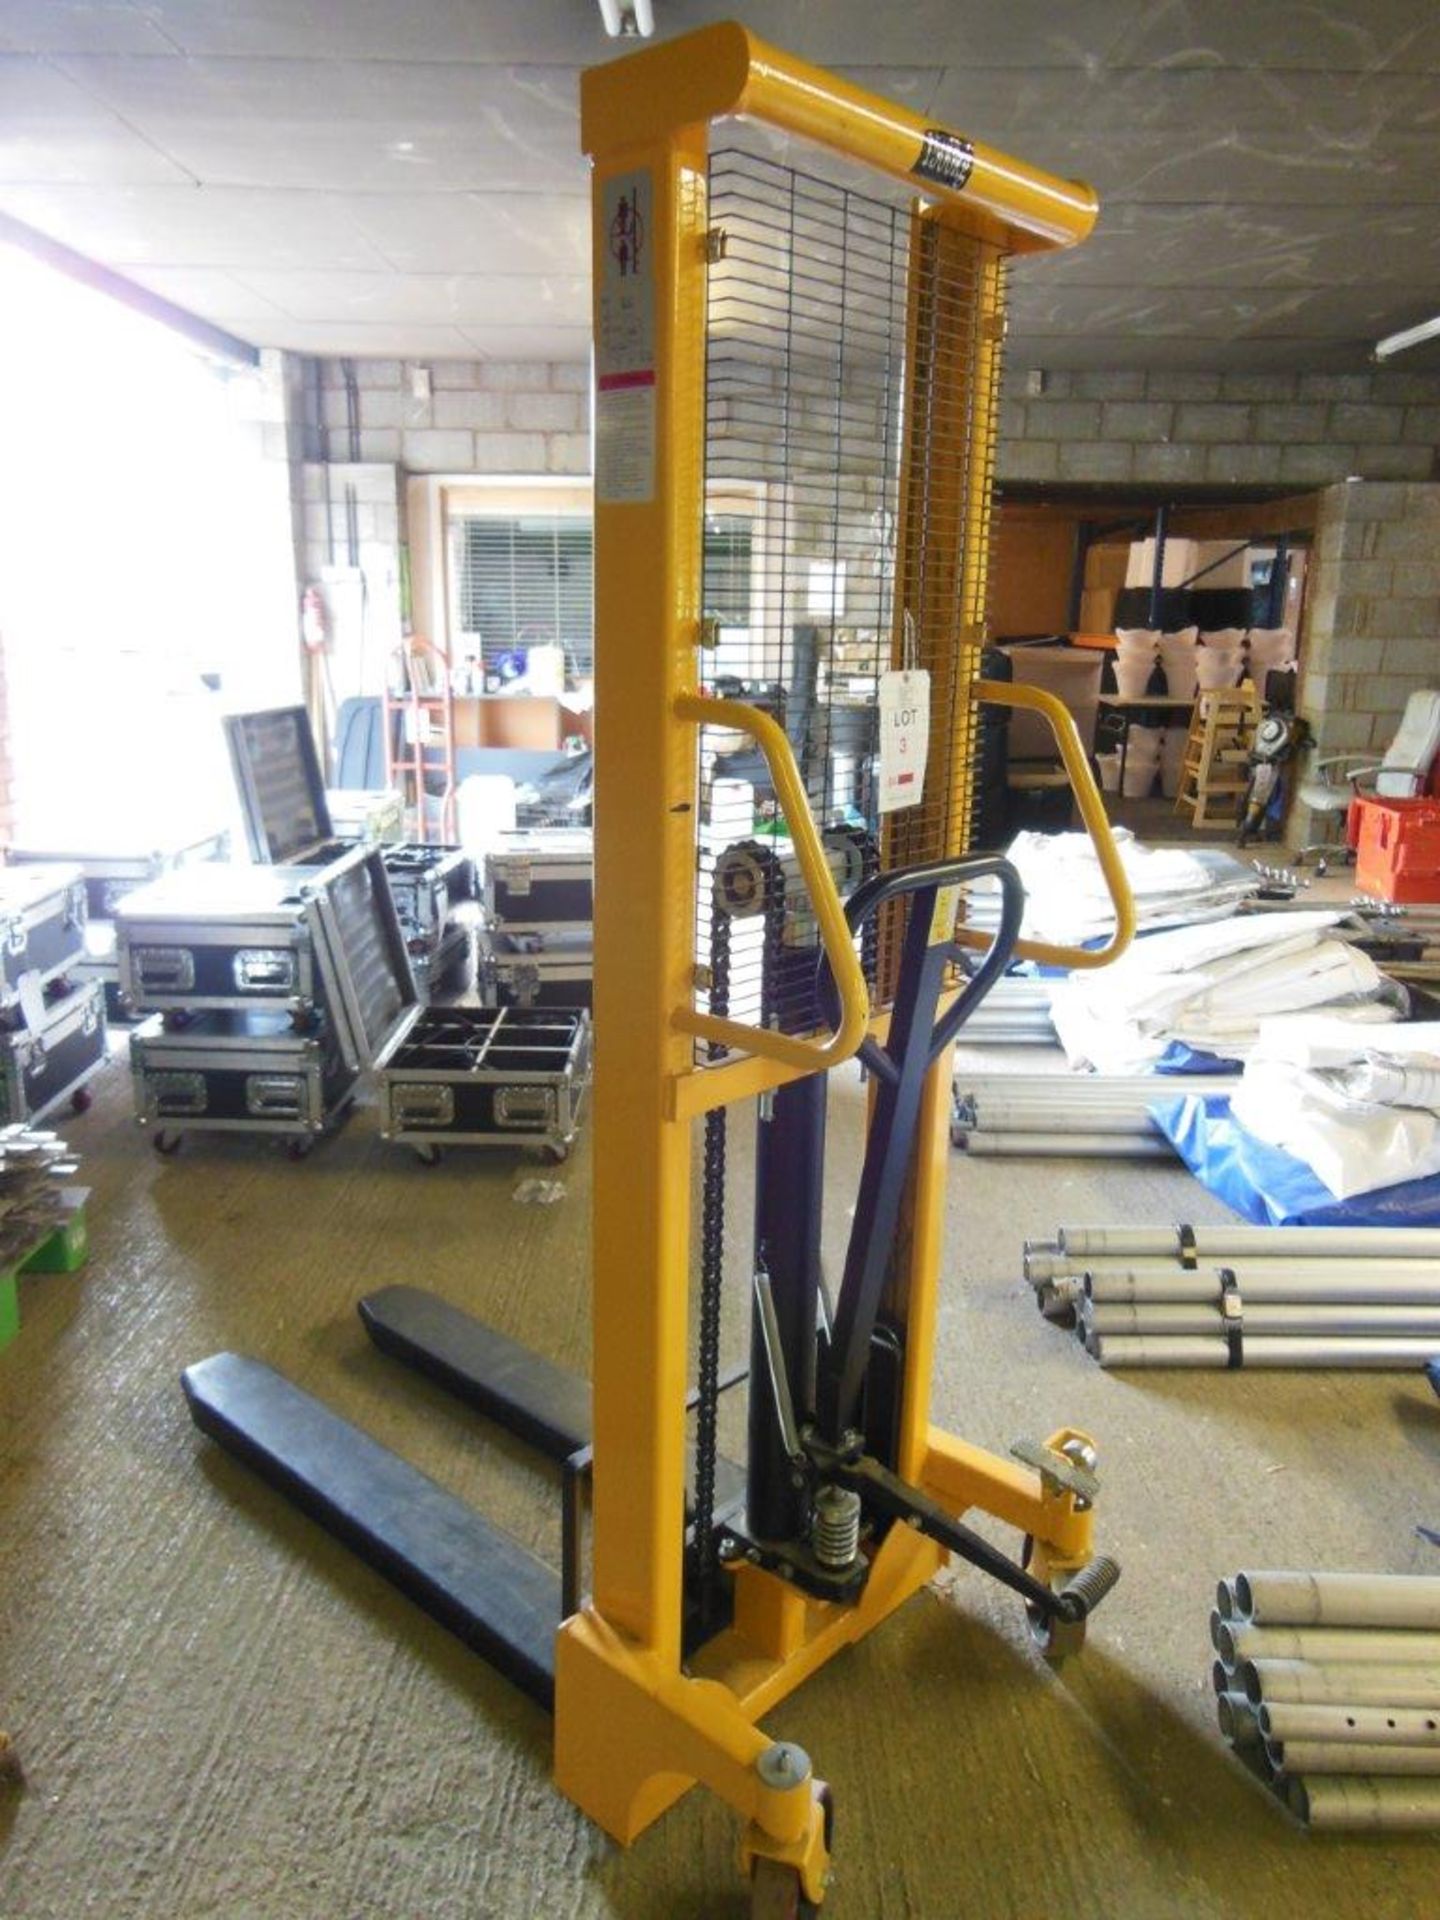 Pallet Truck Warehouse SFH15 manual hydraulic pallet stacker, serial no: J18022934-1/034 (2018) 1, - Image 2 of 3